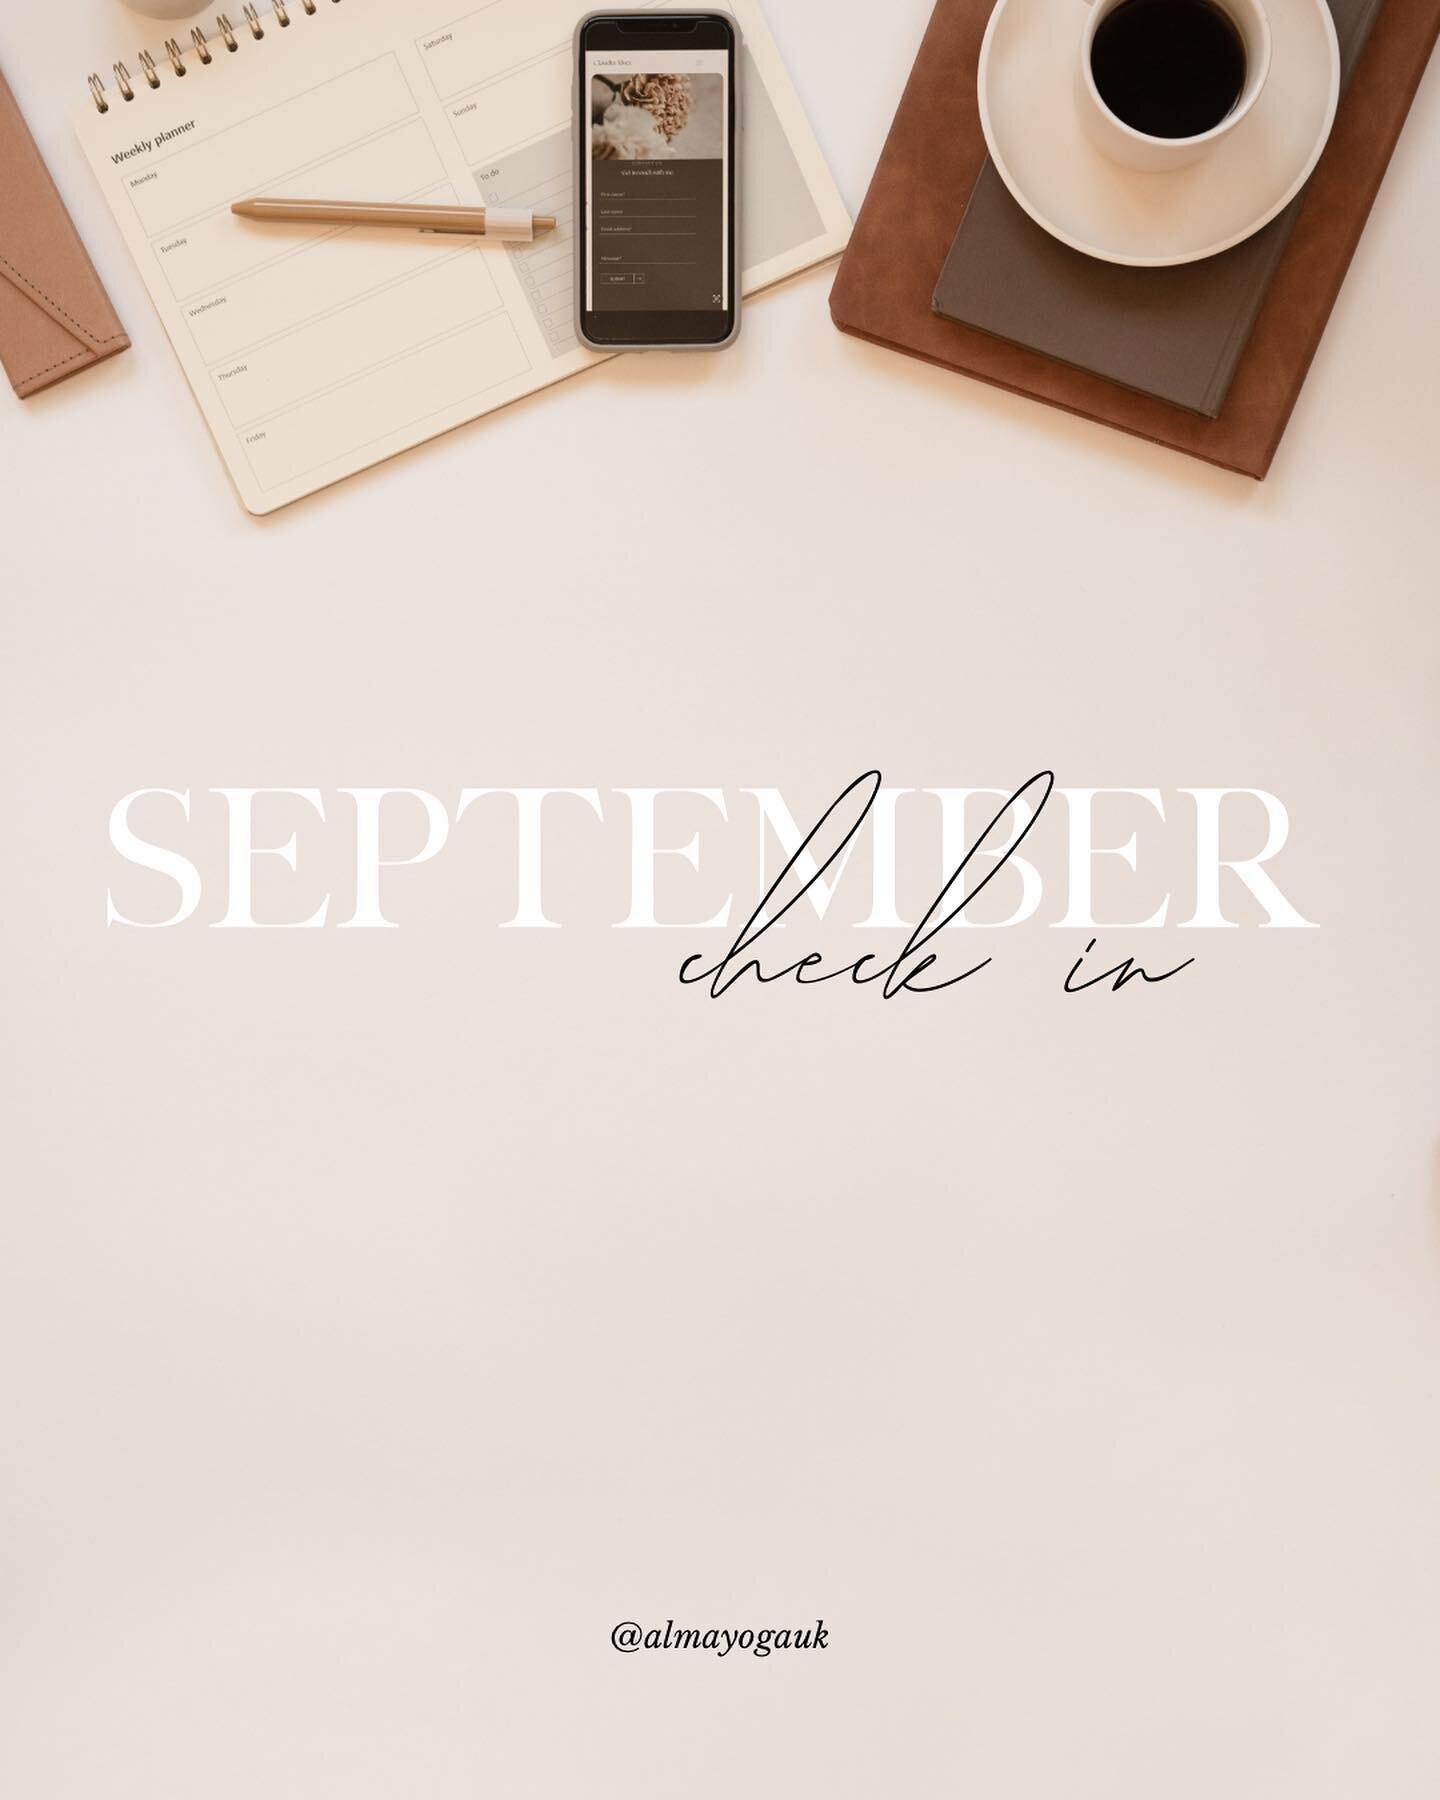 September seems to have gone by in a flash. Take a moment to pause and take in the last month with a self check-in practice to ground, settle and come back to you. ✨

Why not grab a cuppa, get into your comfiest and cosiest clothes, and light up a de